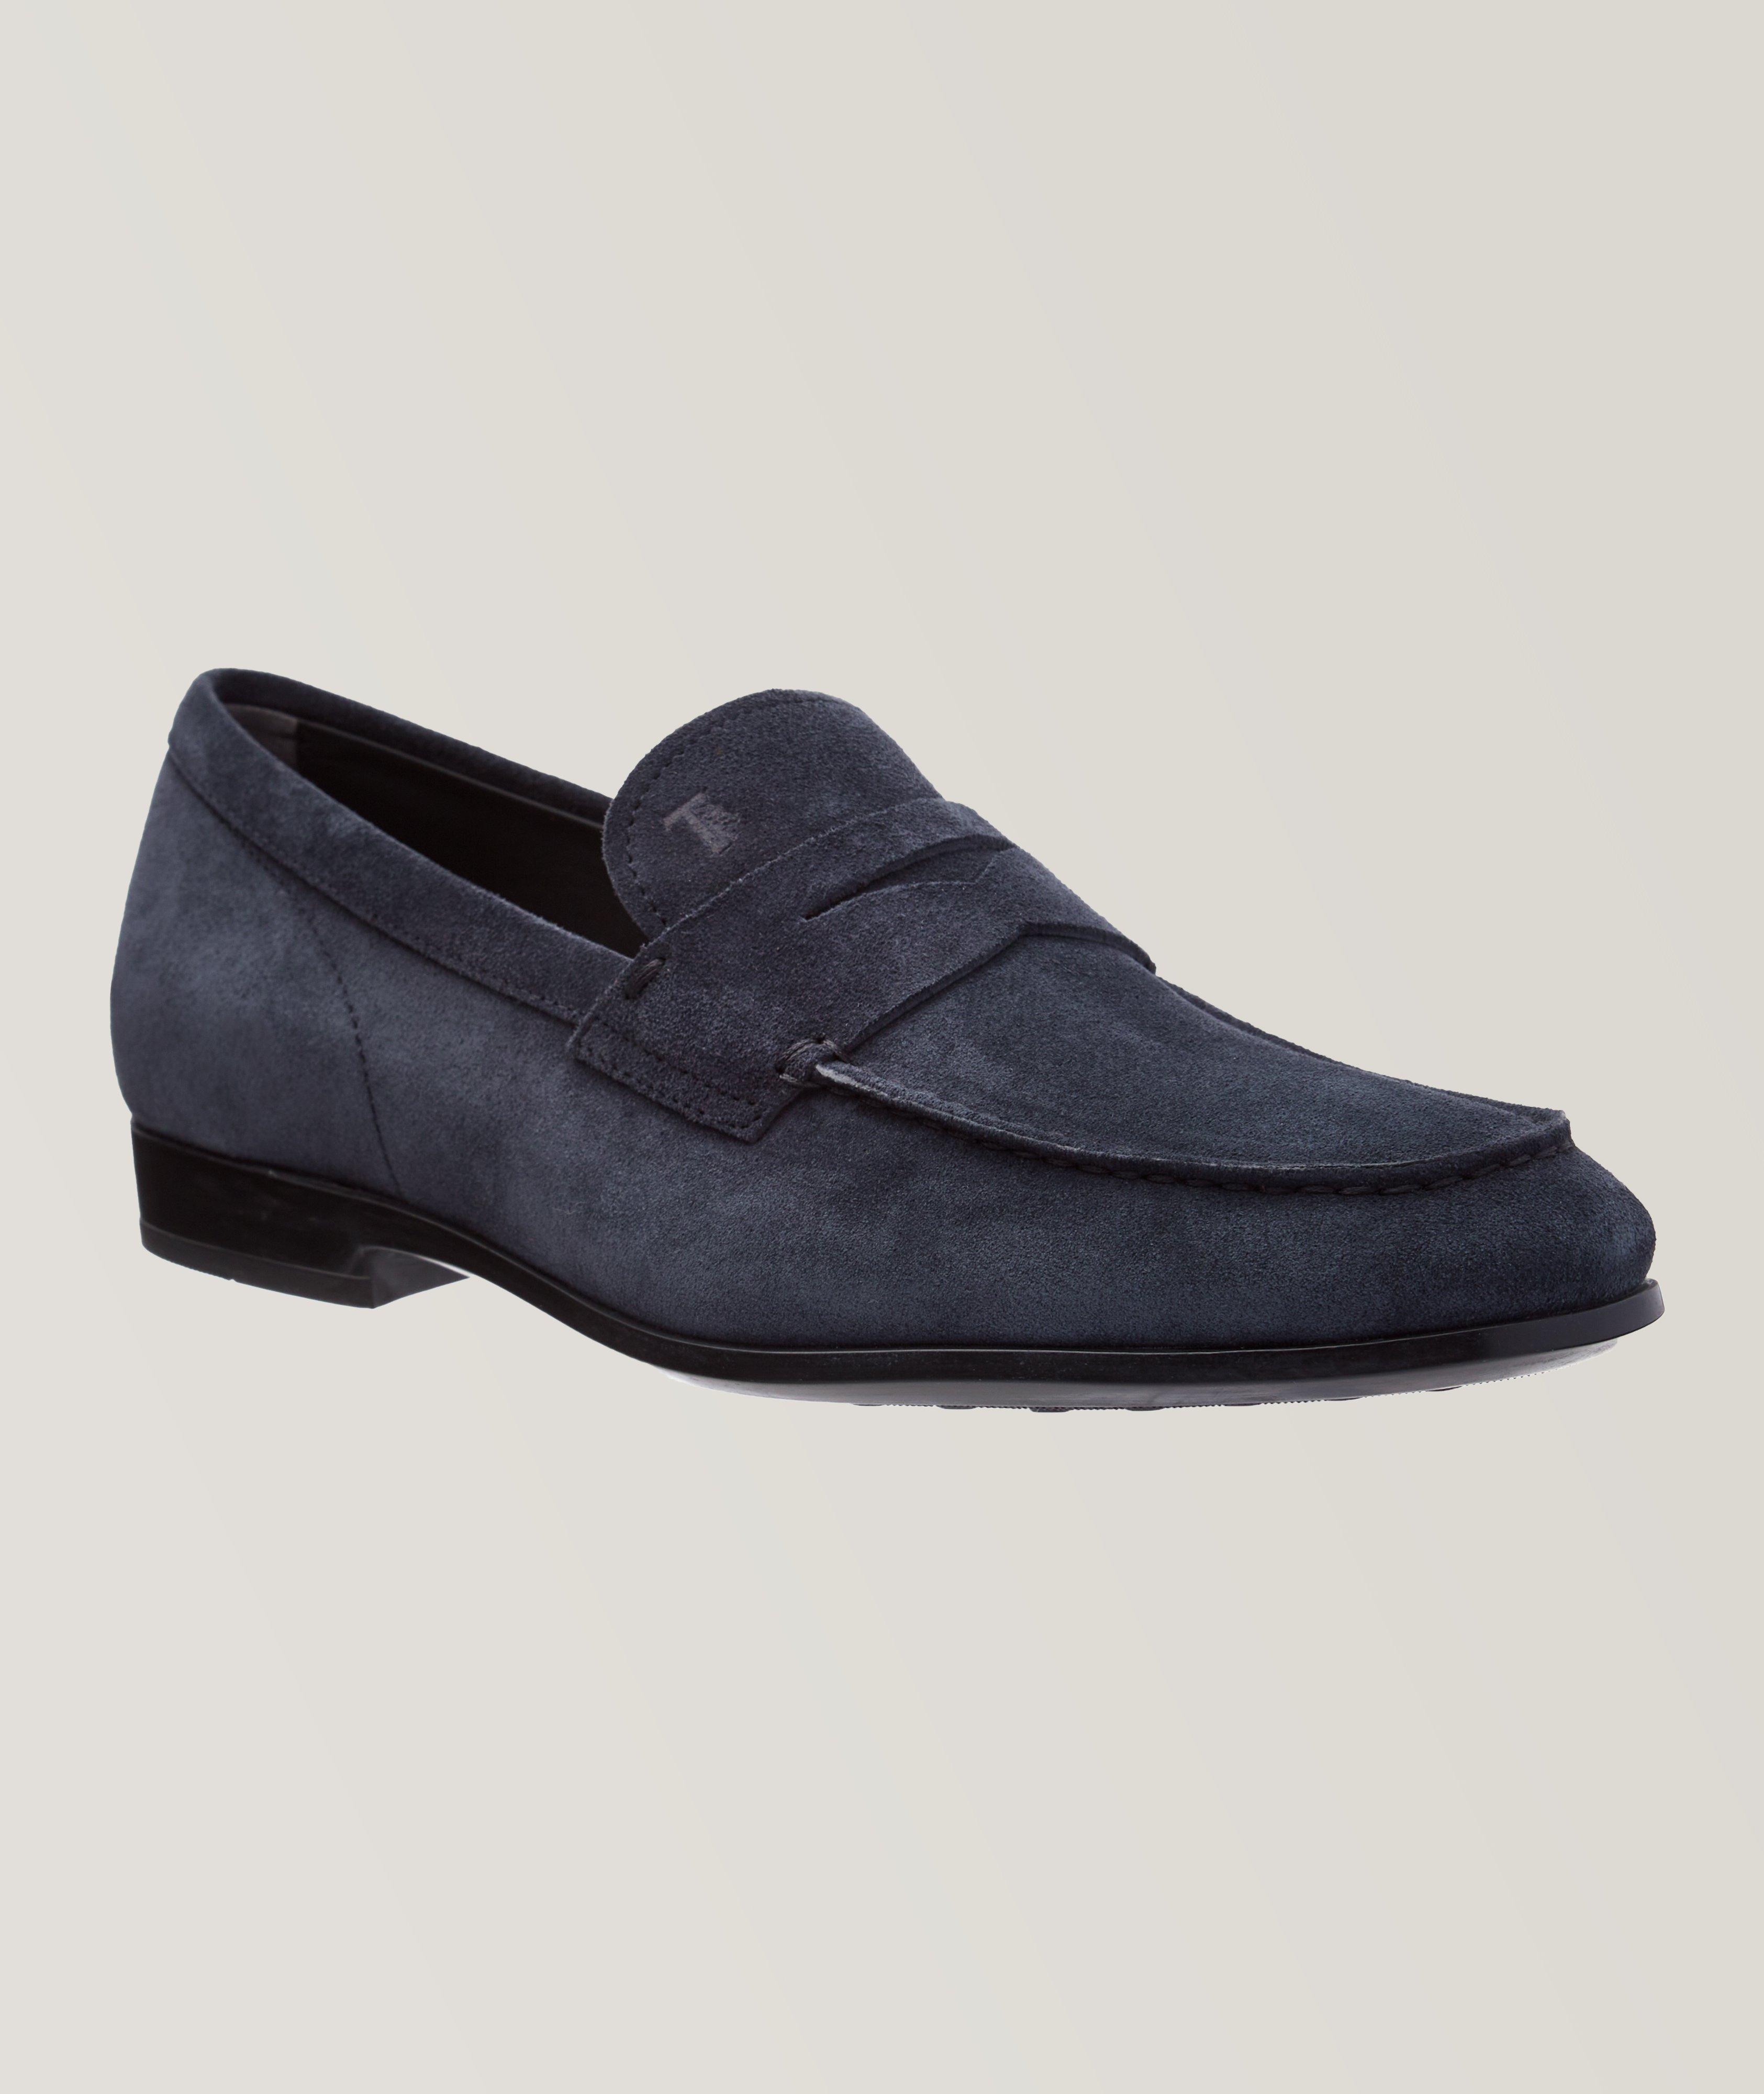 Suede Penny Loafers image 0